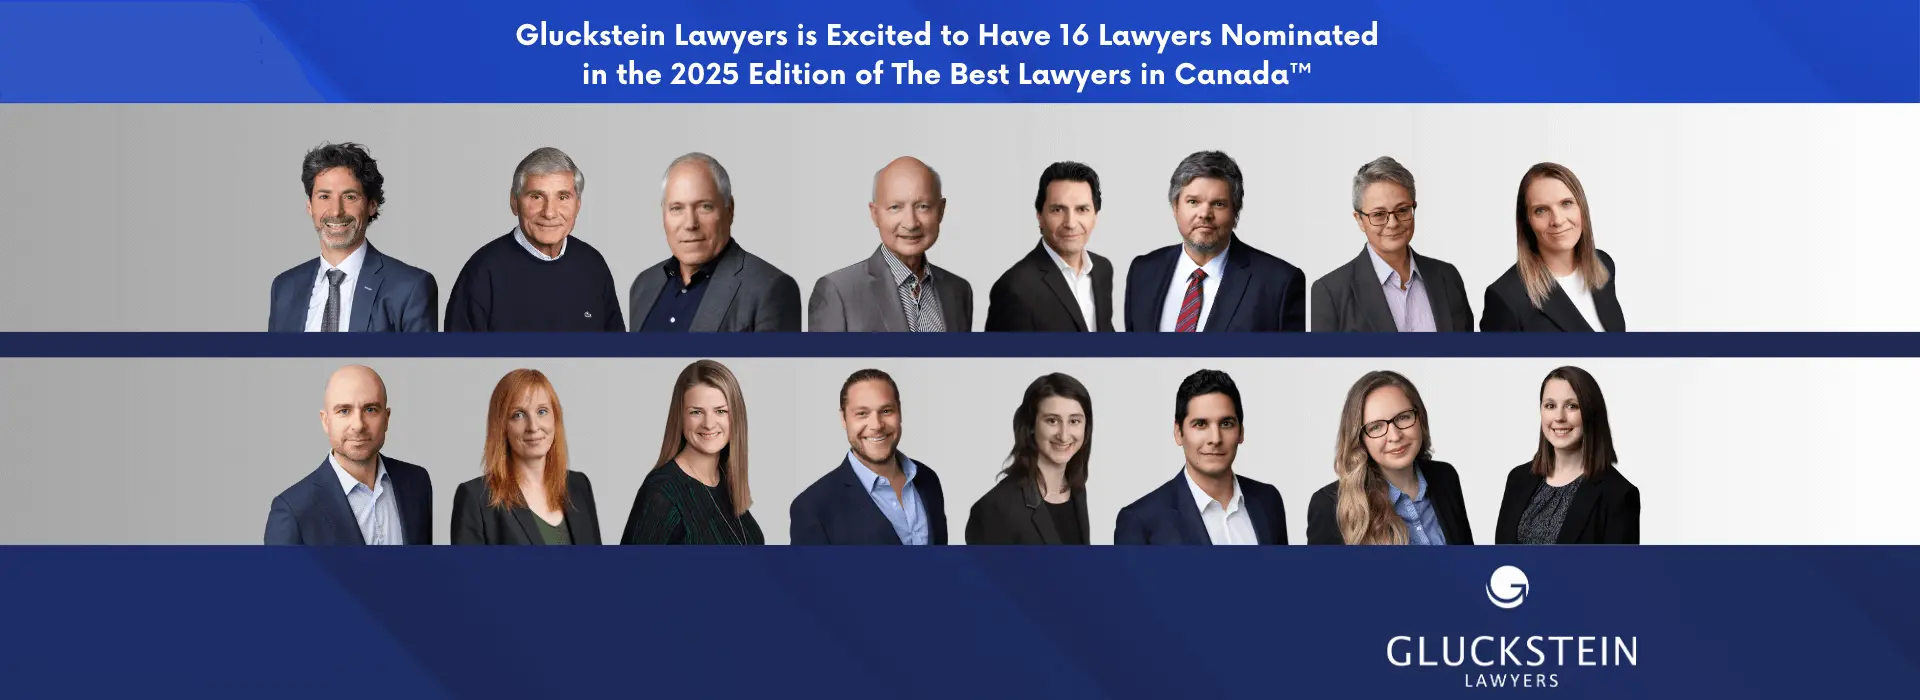 personal injury lawyer nominees for the best lawyers in Canada 2025 list